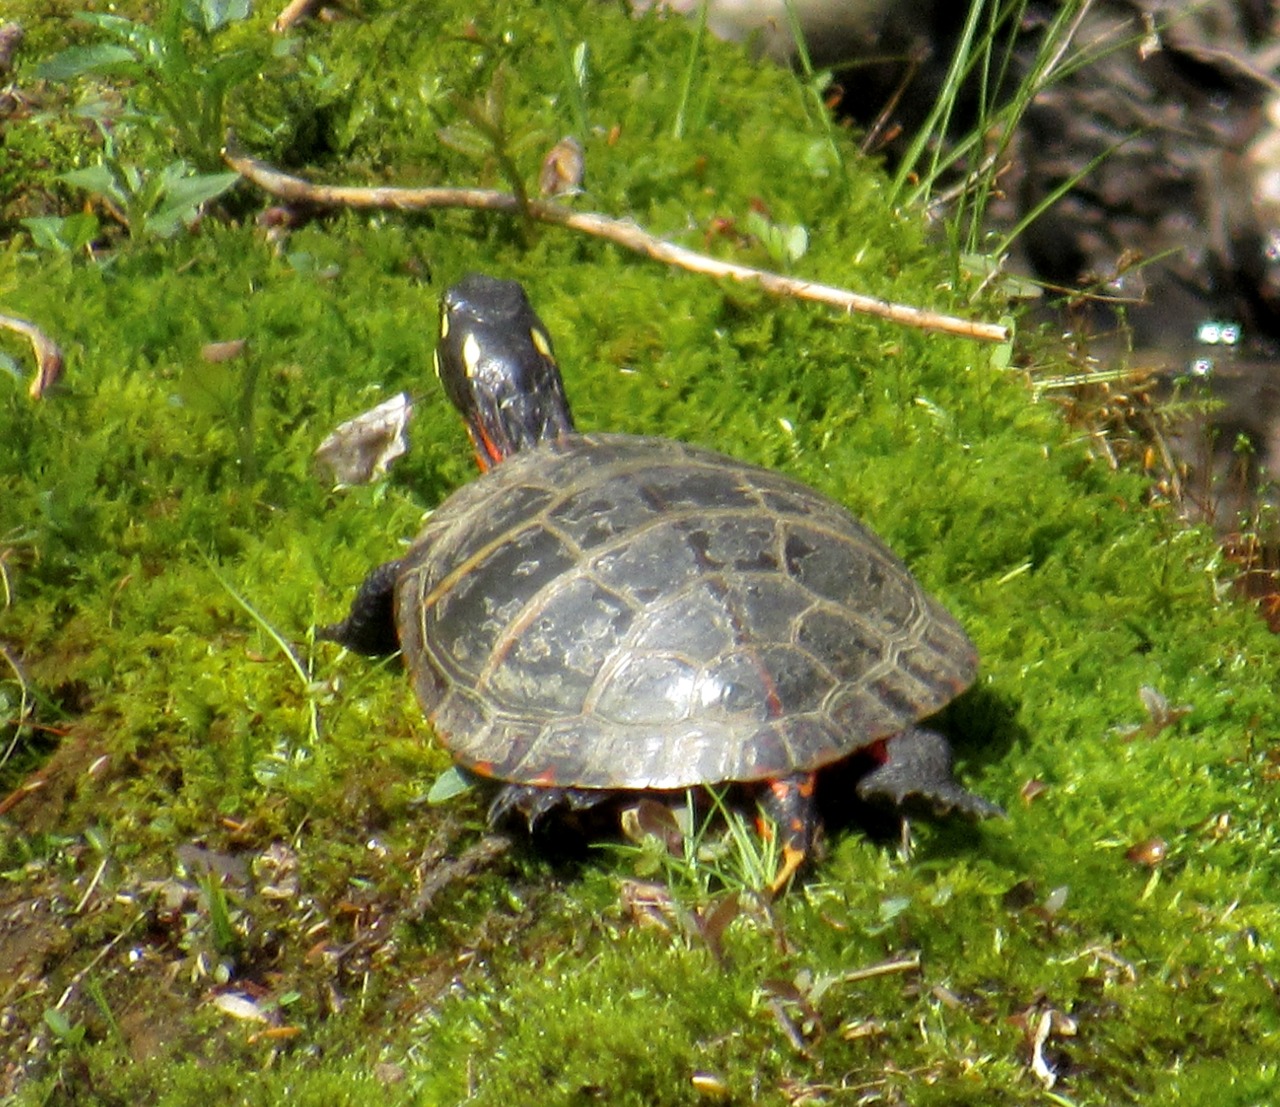 Eastern painted turtles I saw yesterday, Chrysemys picta. It was a good day for basking in the sun. #turtle#tortoise#painted turtle #eastern painted turtle #may #basking in the sun #basking